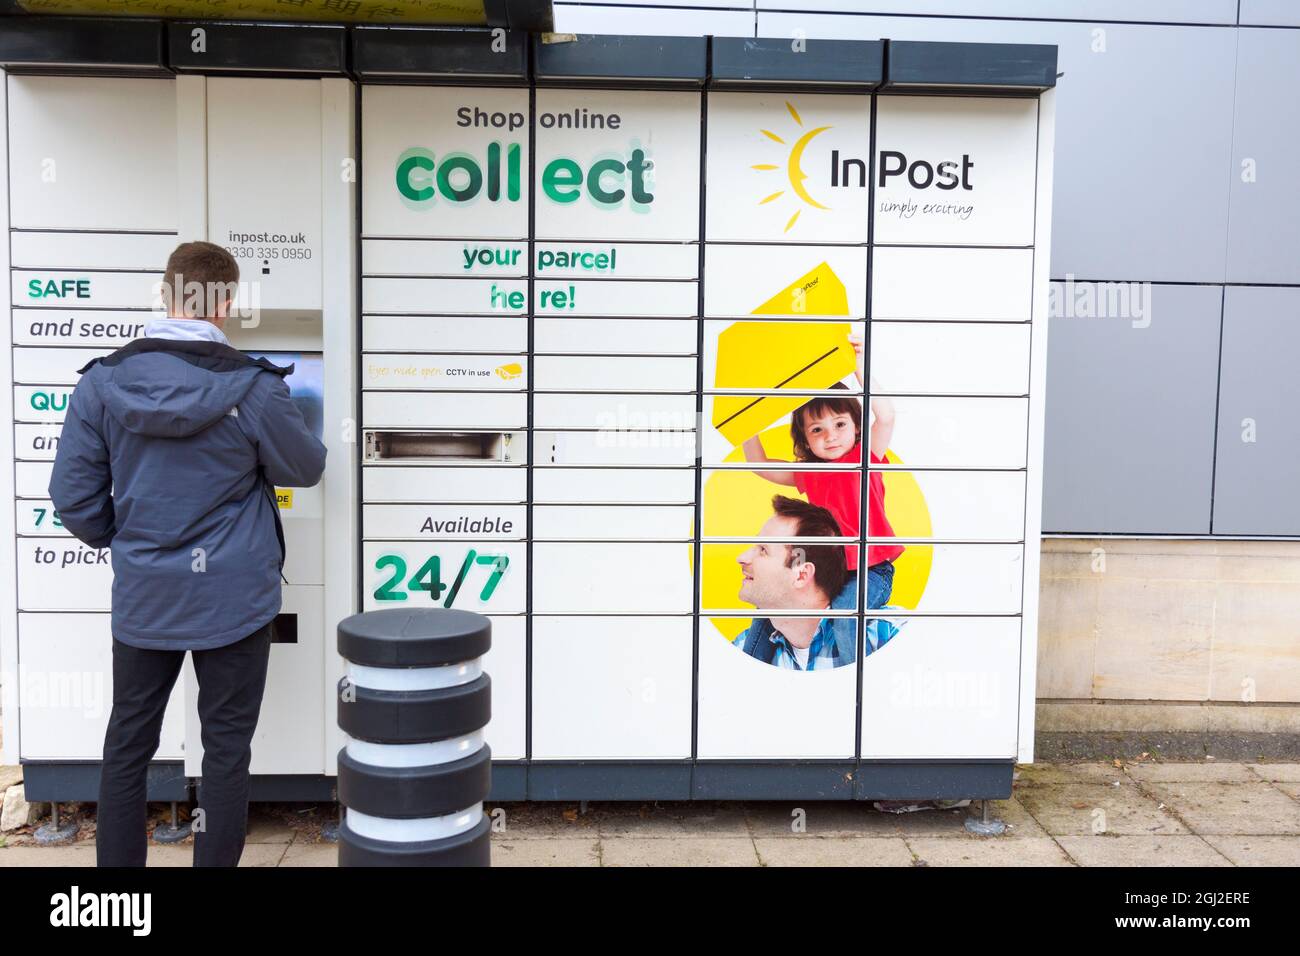 InPost collection point, Bath, UK Stock Photo